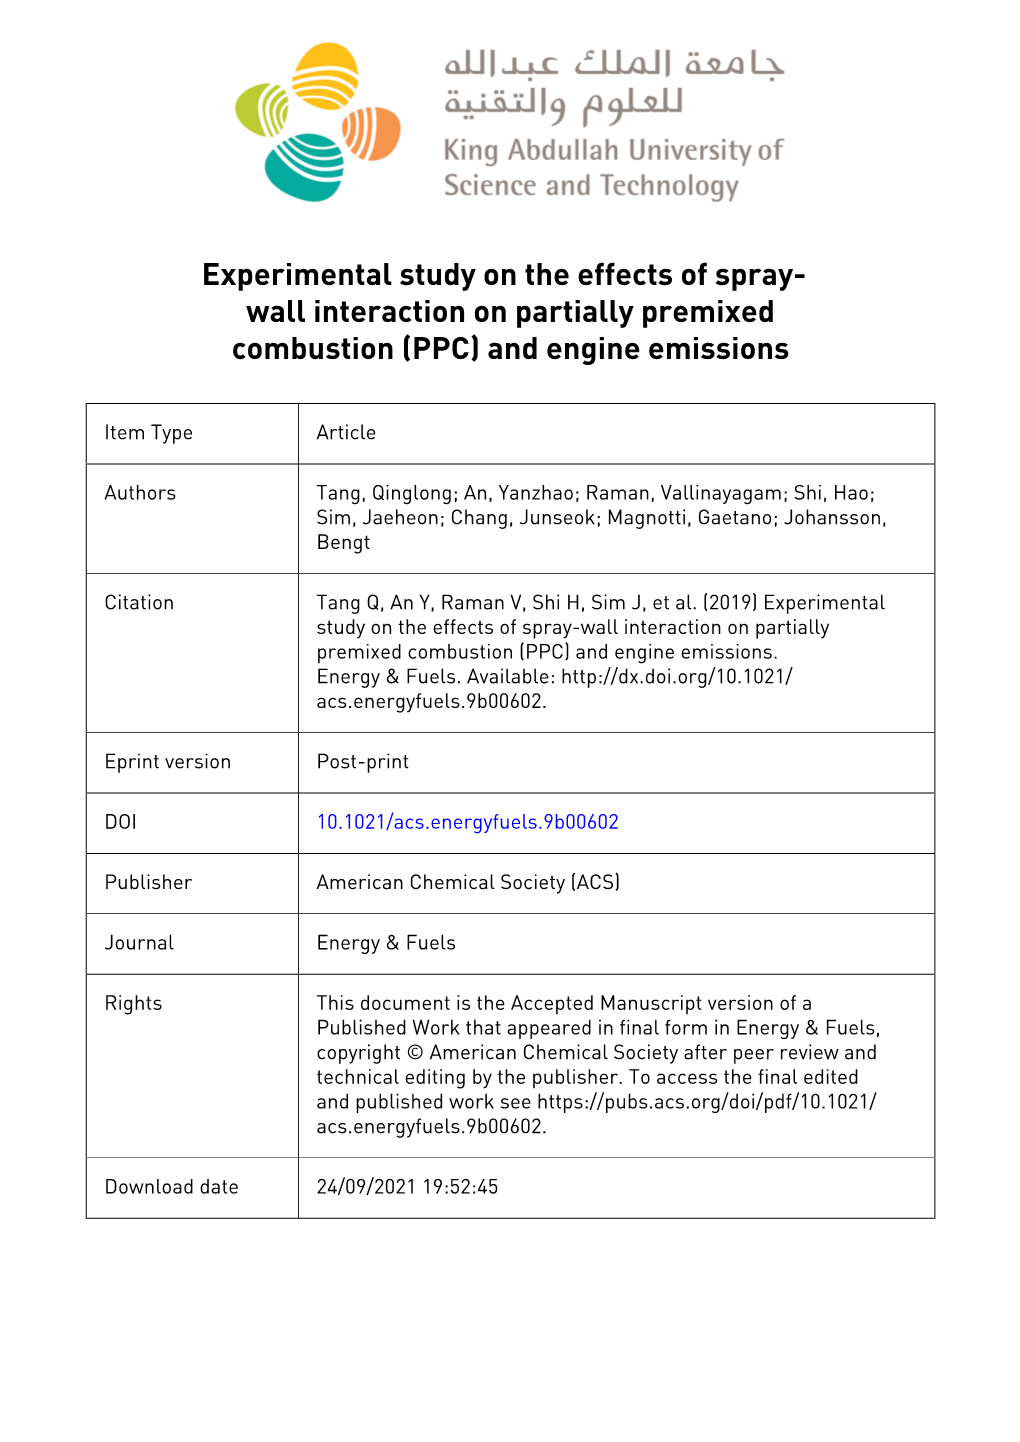 Experimental Study on the Effects of Spray-Wall Interaction on Partially Premixed Combustion (PPC) and Engine Emissions